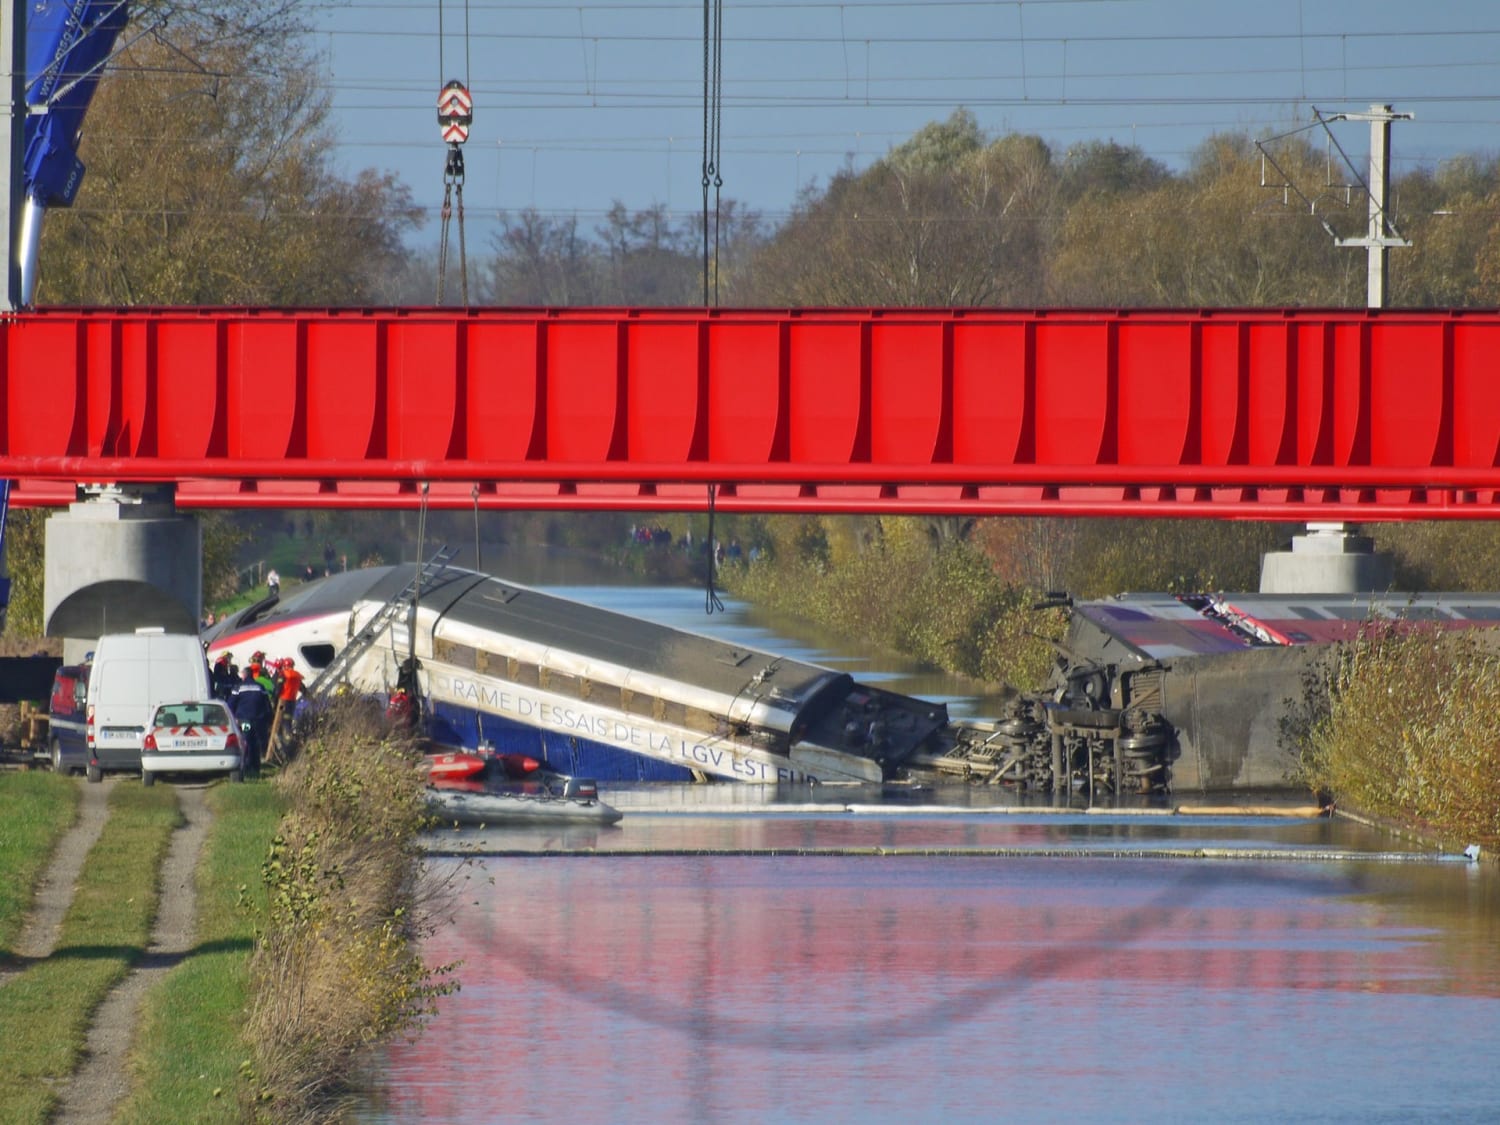 The 2015 Eckwersheim TGV Derailment. An overcrowded high speed test train derails in a turn due to excessive speed and breaks apart. 11 people die. More information in the comments.